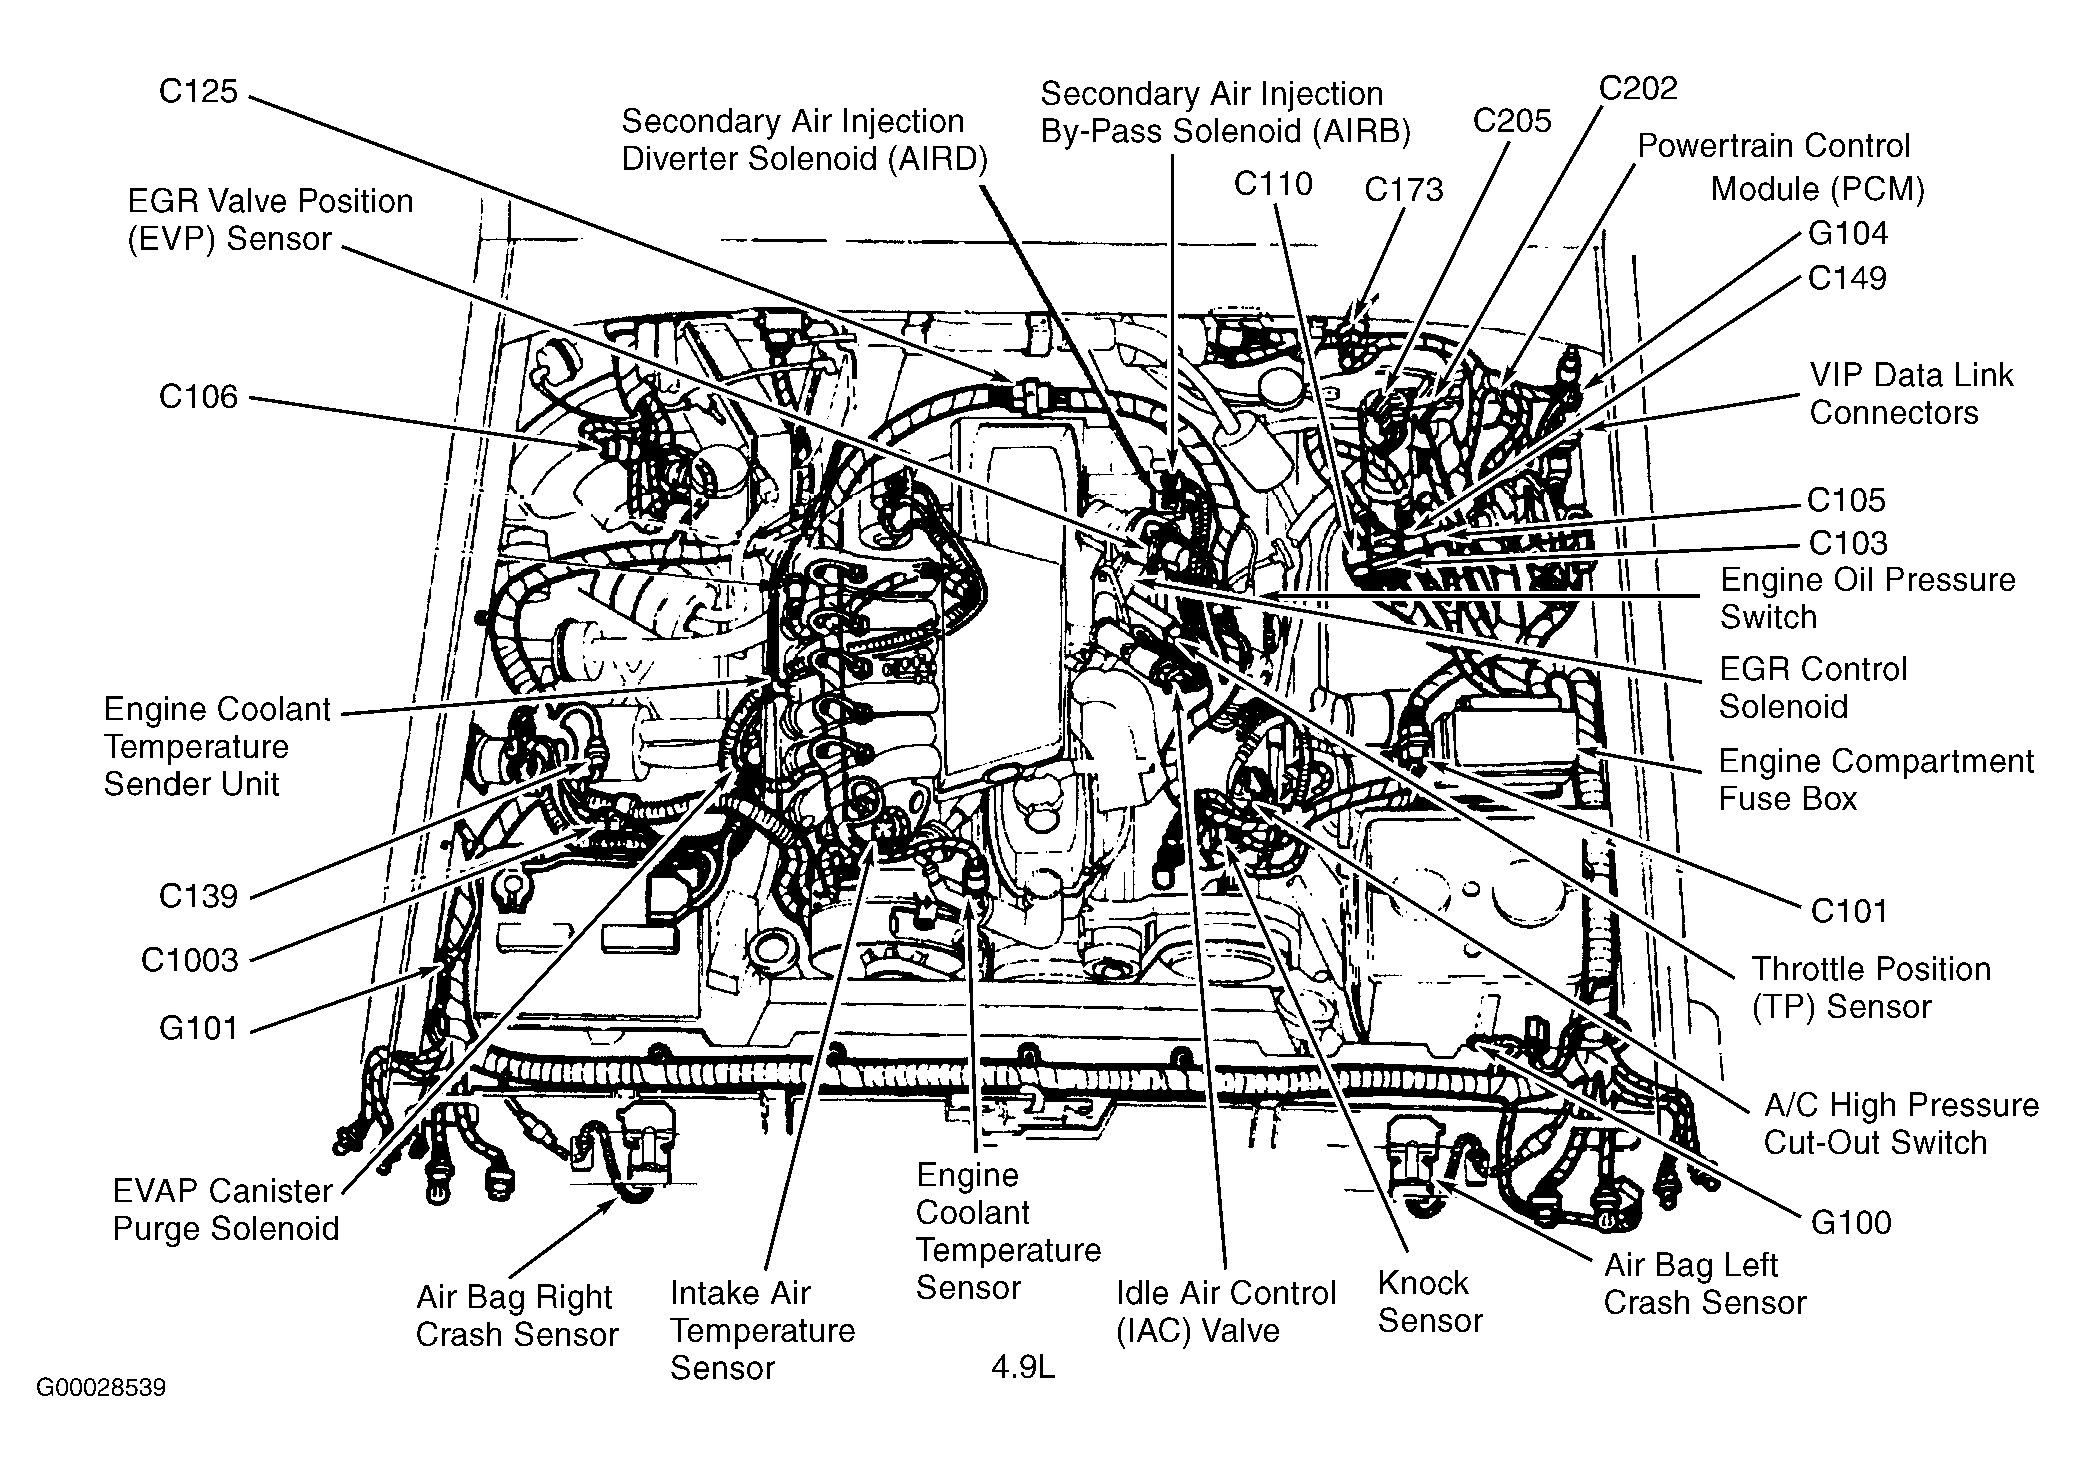 1995 ford Mustang Engine Diagram 1995 6 Cylinder Engine Diagram Wiring Wiring Diagrams Instructions Of 1995 ford Mustang Engine Diagram